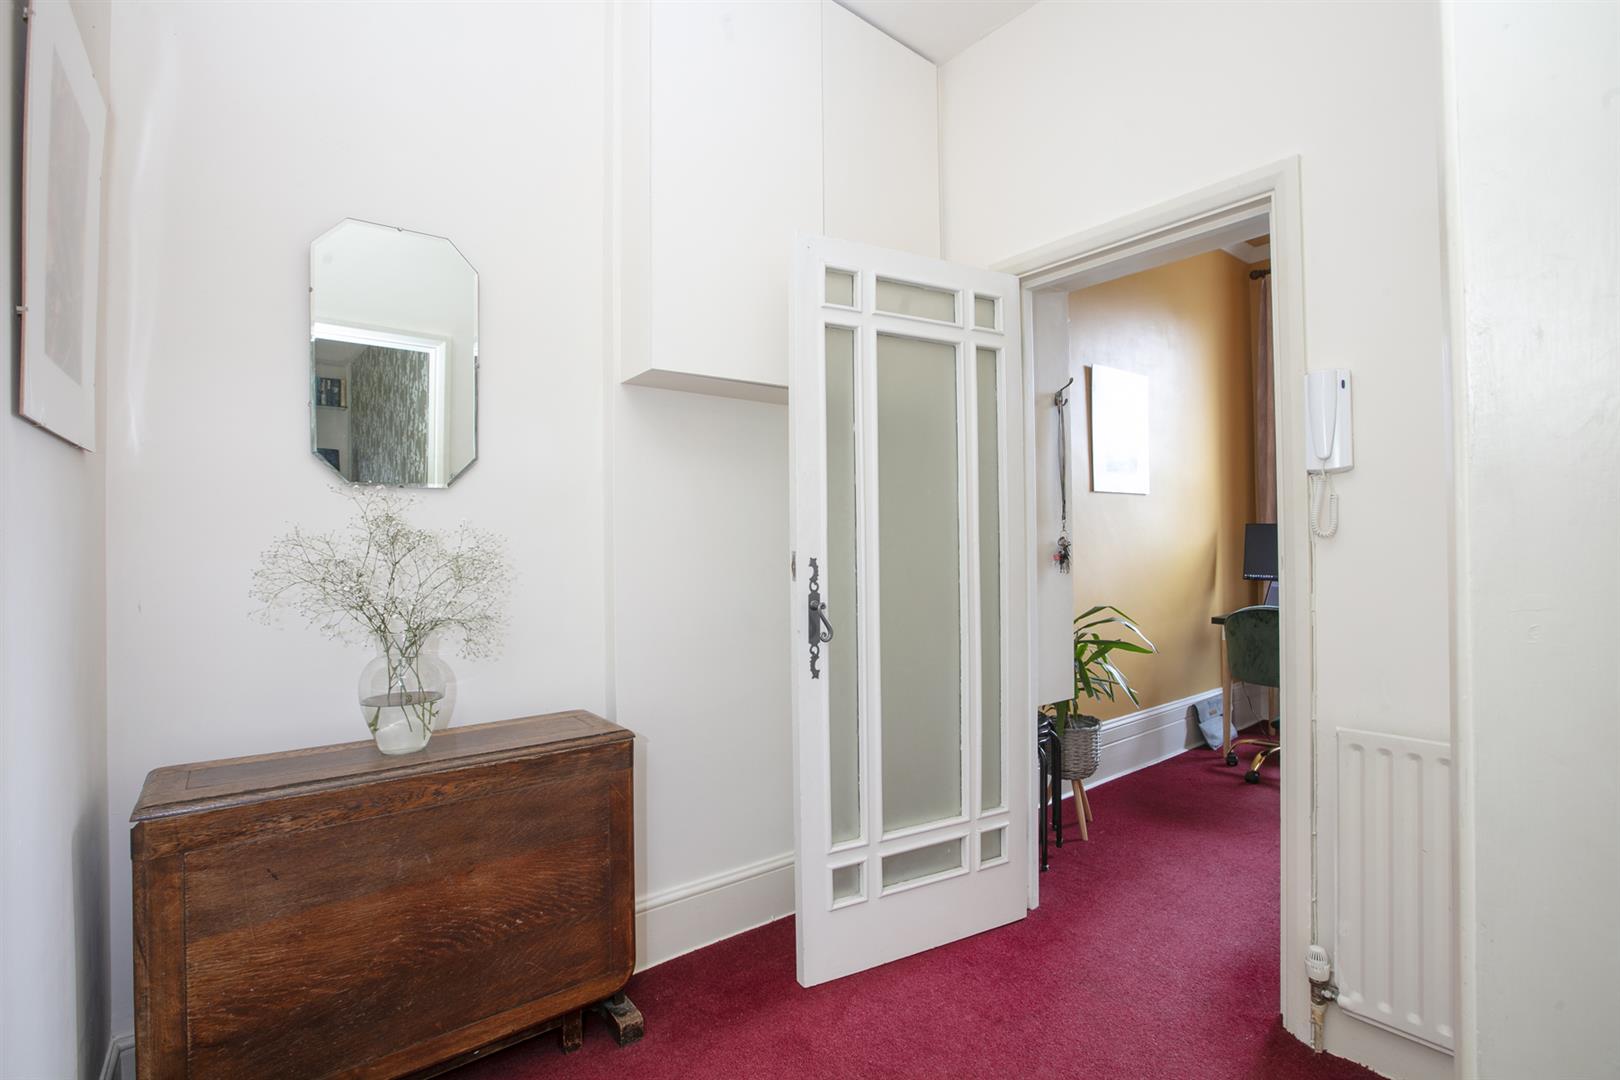 Flat - Conversion For Sale in Peckham Road, Camberwell, SE5 859 view12